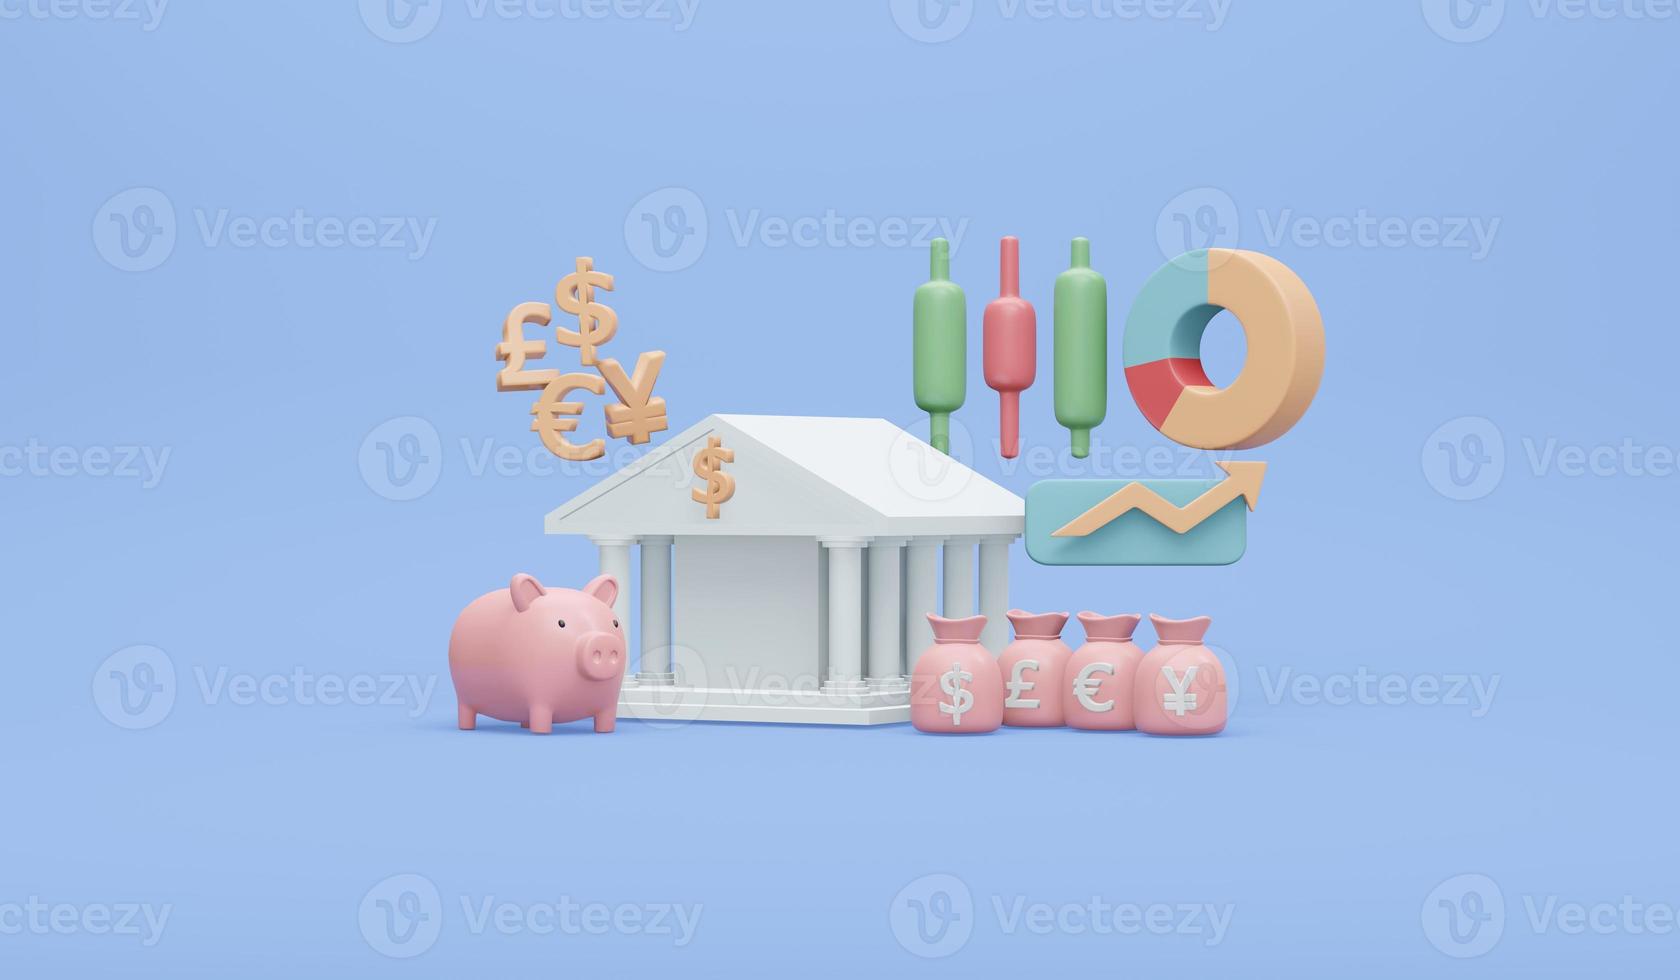 3D Rendering of money element bank icon currency stock market icon piggy bank concept of financial investment on background. 3D Render illustration cartoon style. photo